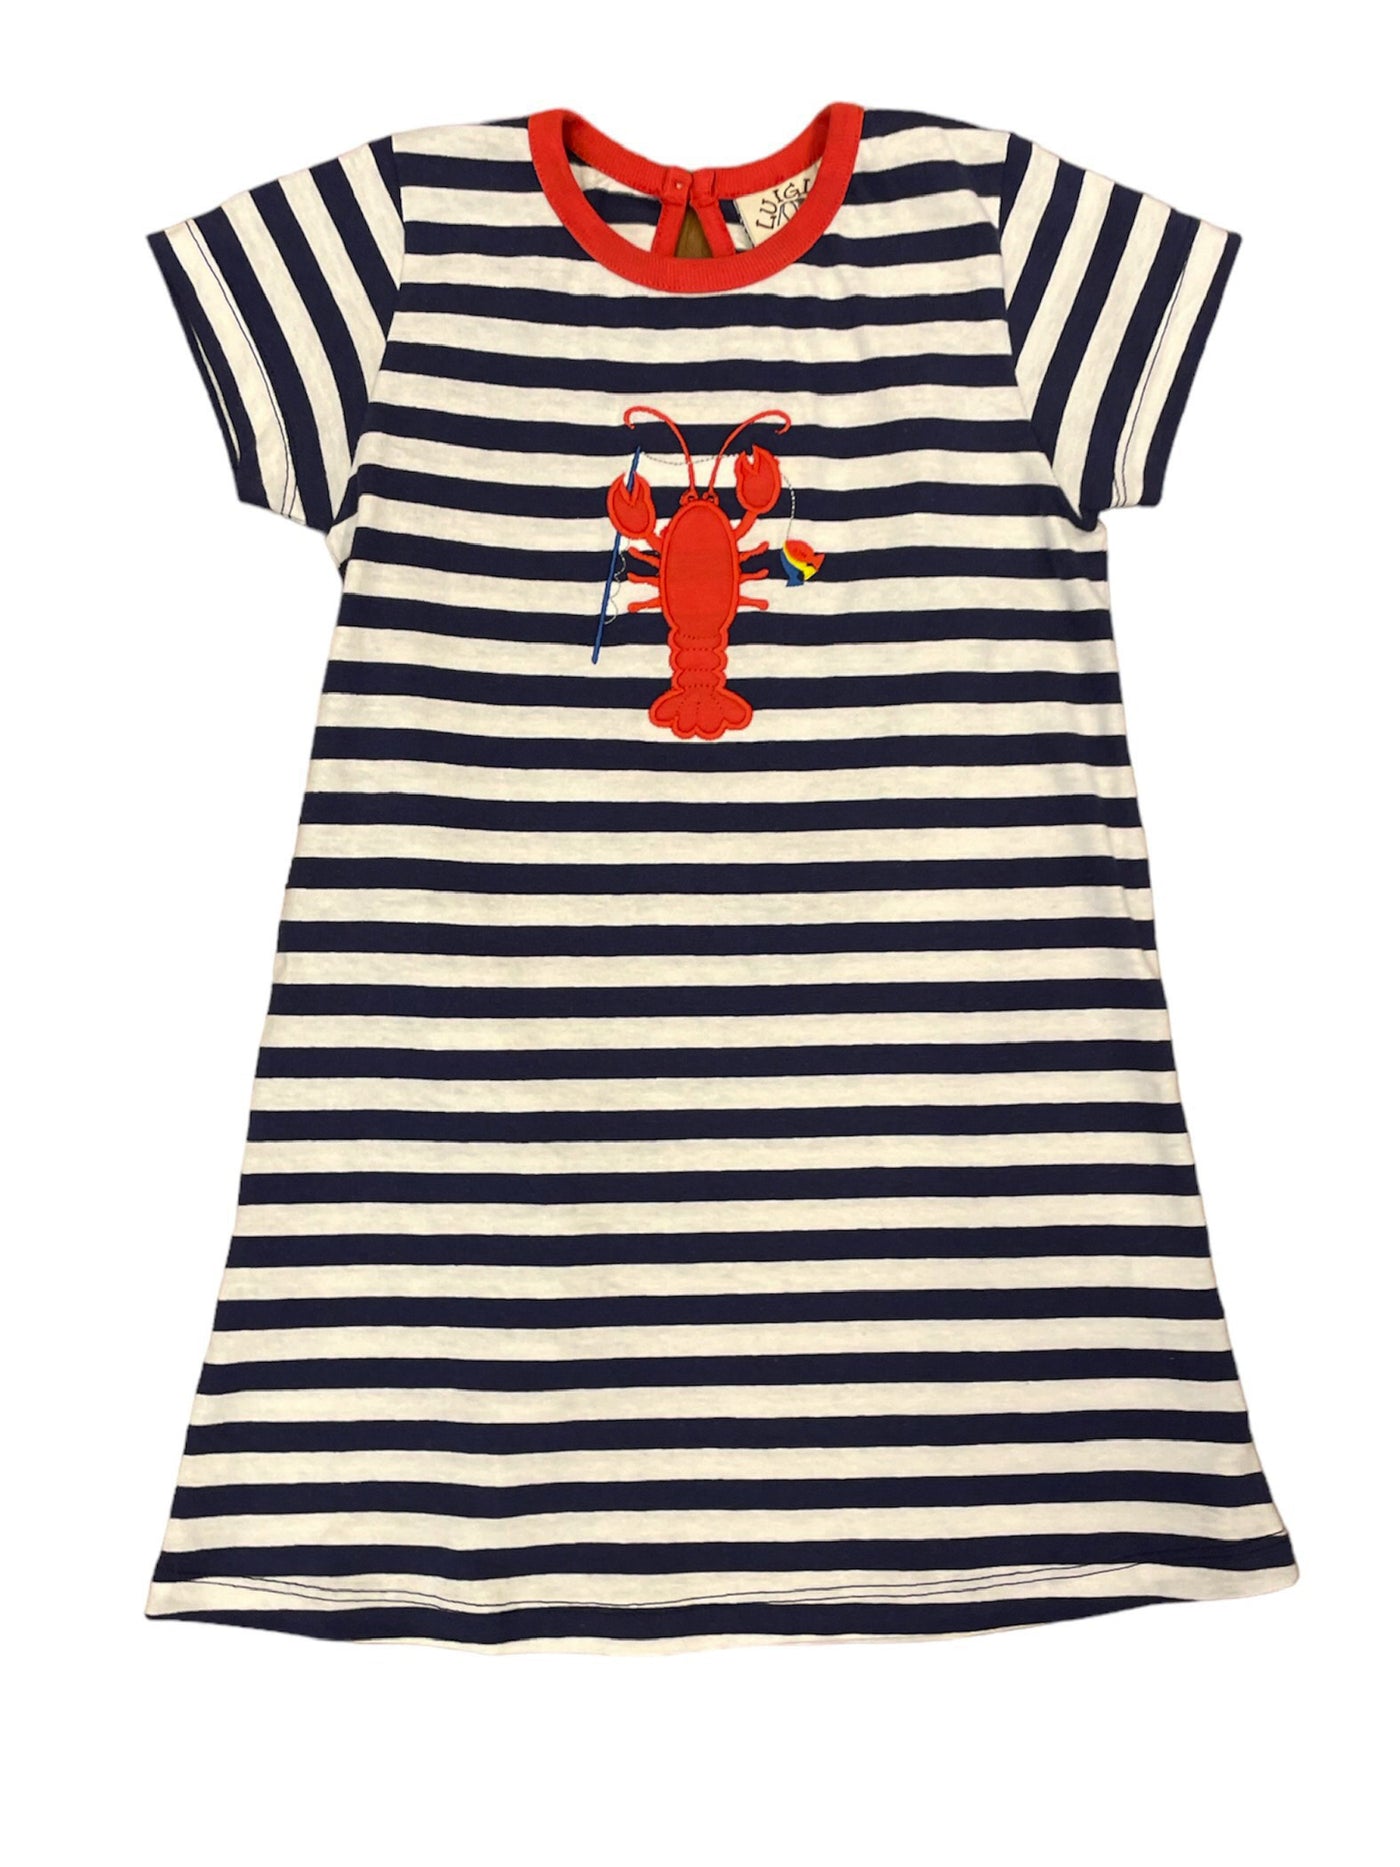 Royal and White Stripe Dress with Fishing Lobster